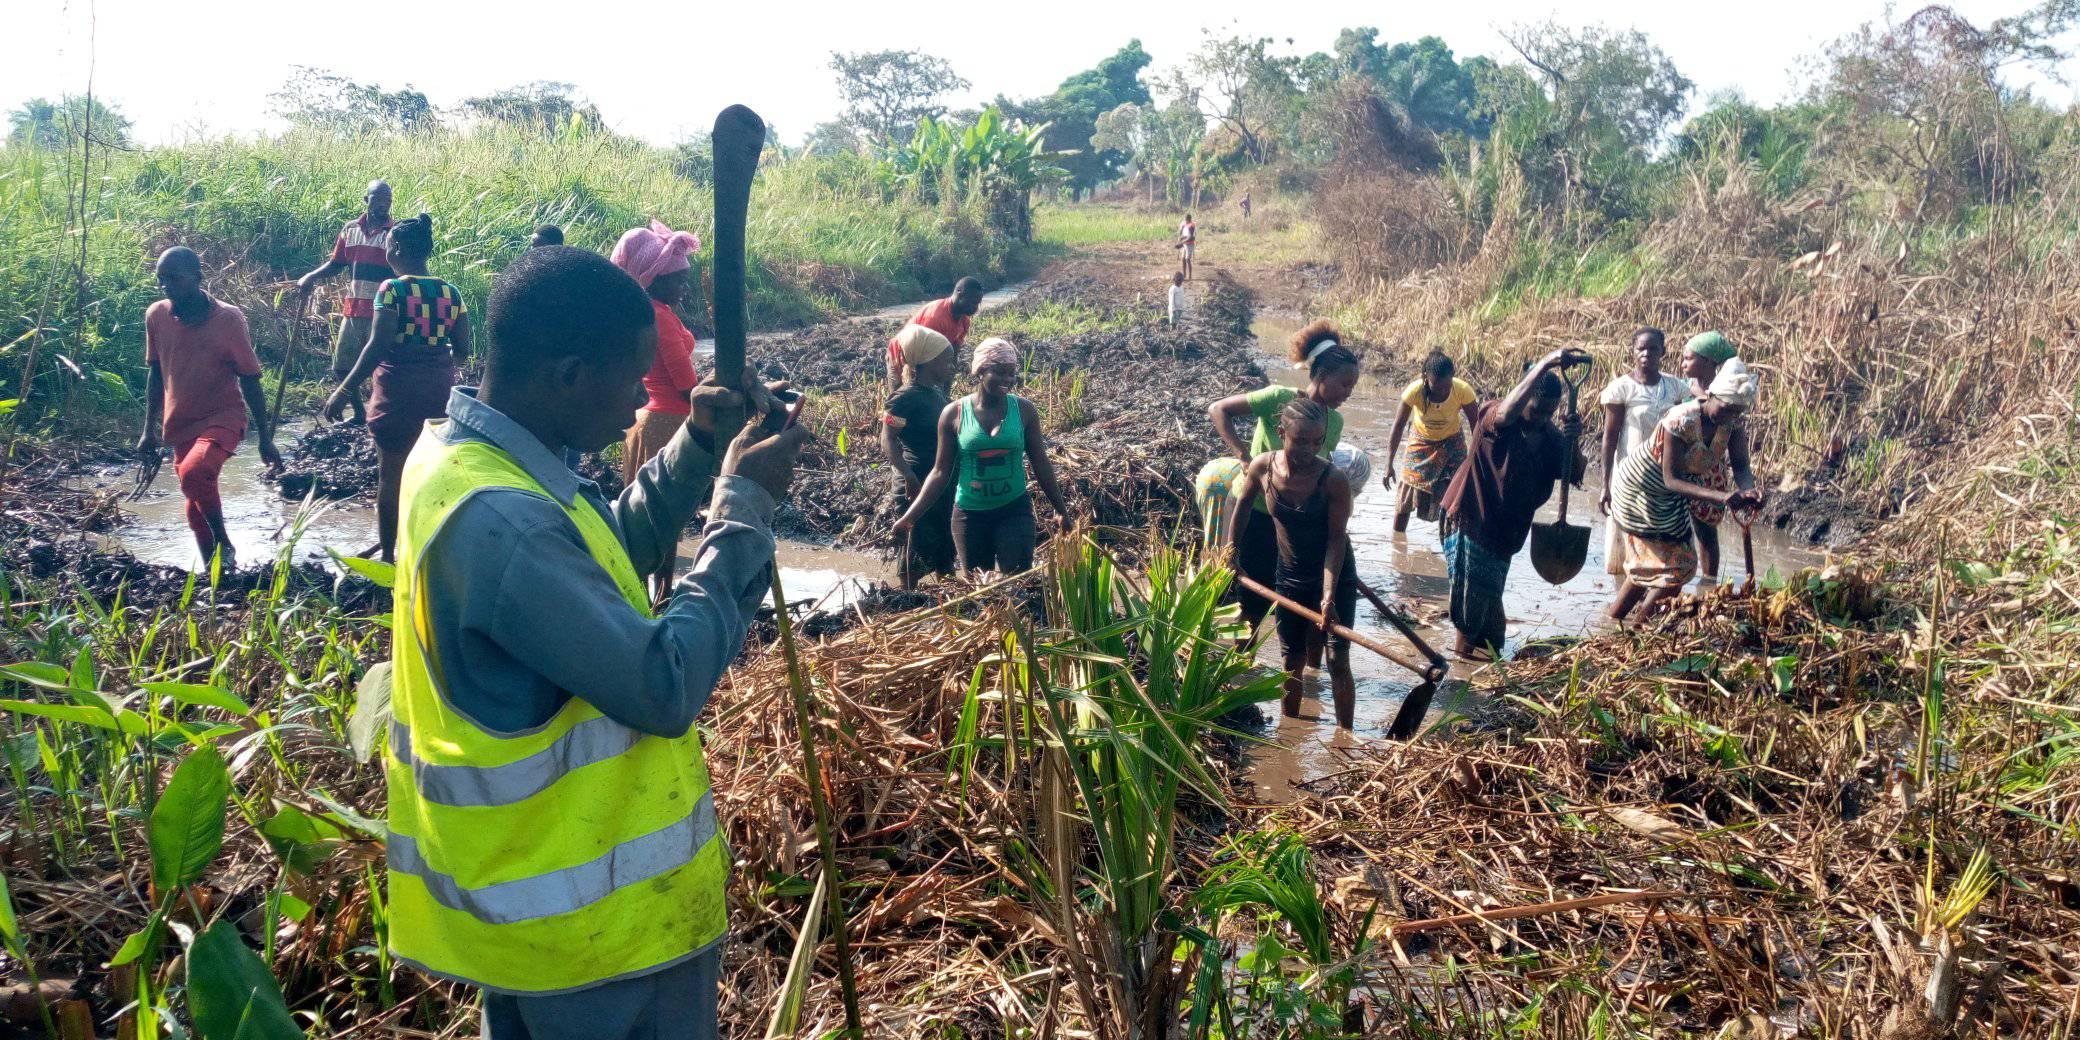 Residents of Yambio use ‘bare hands’ to construct road, bridge